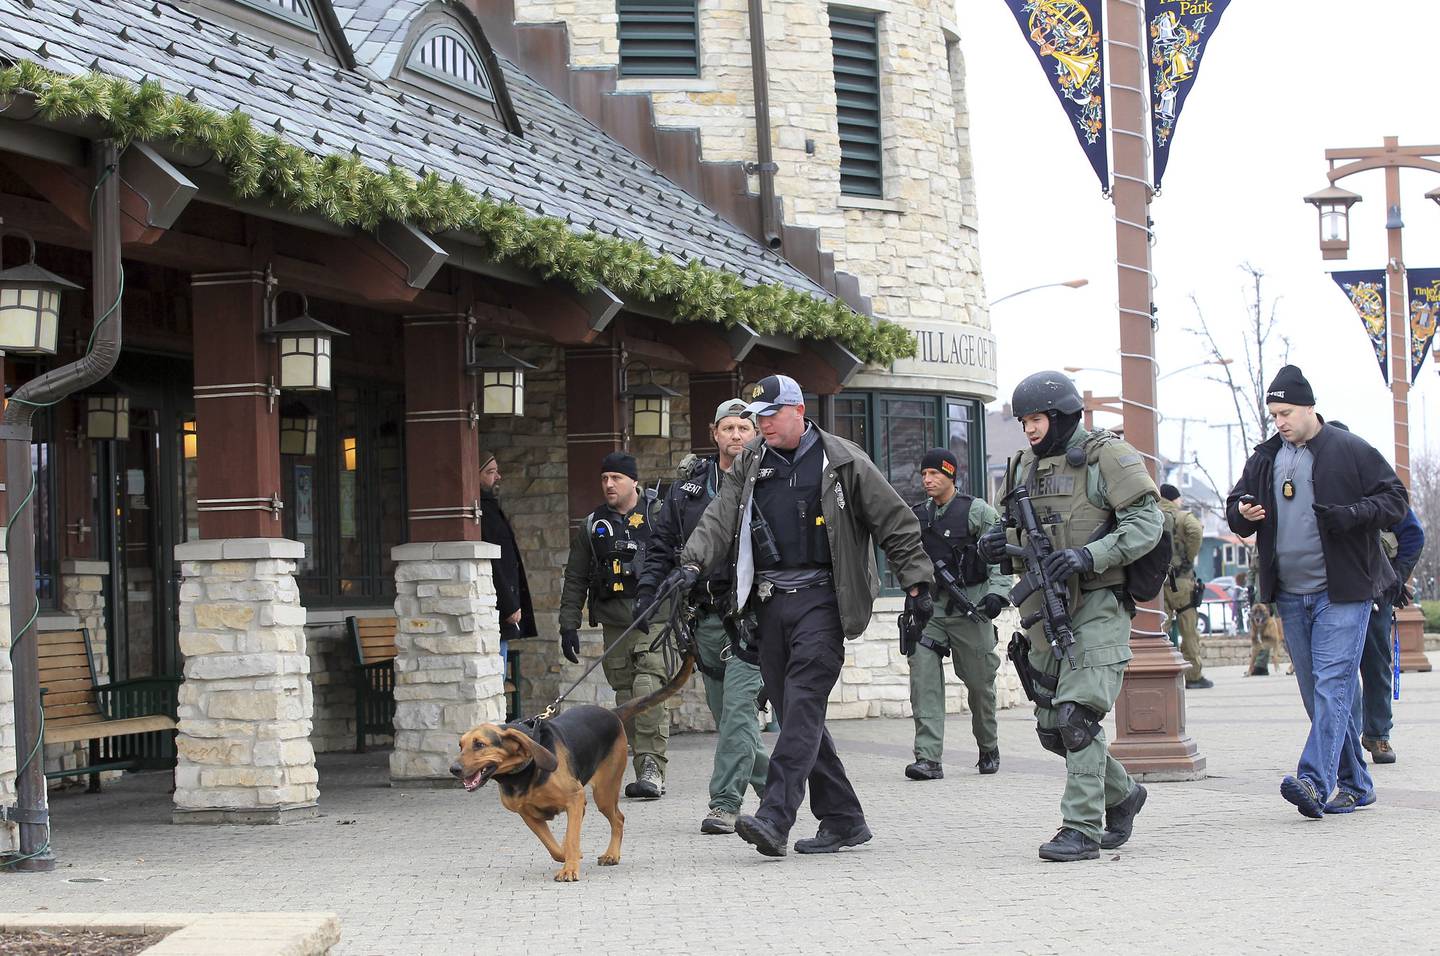 FBI agents, joined by Tinley Park and Cook County sheriff's deputies, search the Metra station in Tinley Park for escaped bank robbers Ken Conley and Joseph "Jose" Banks after the two escaped from the Metropolitan Correctional Center in the Loop.